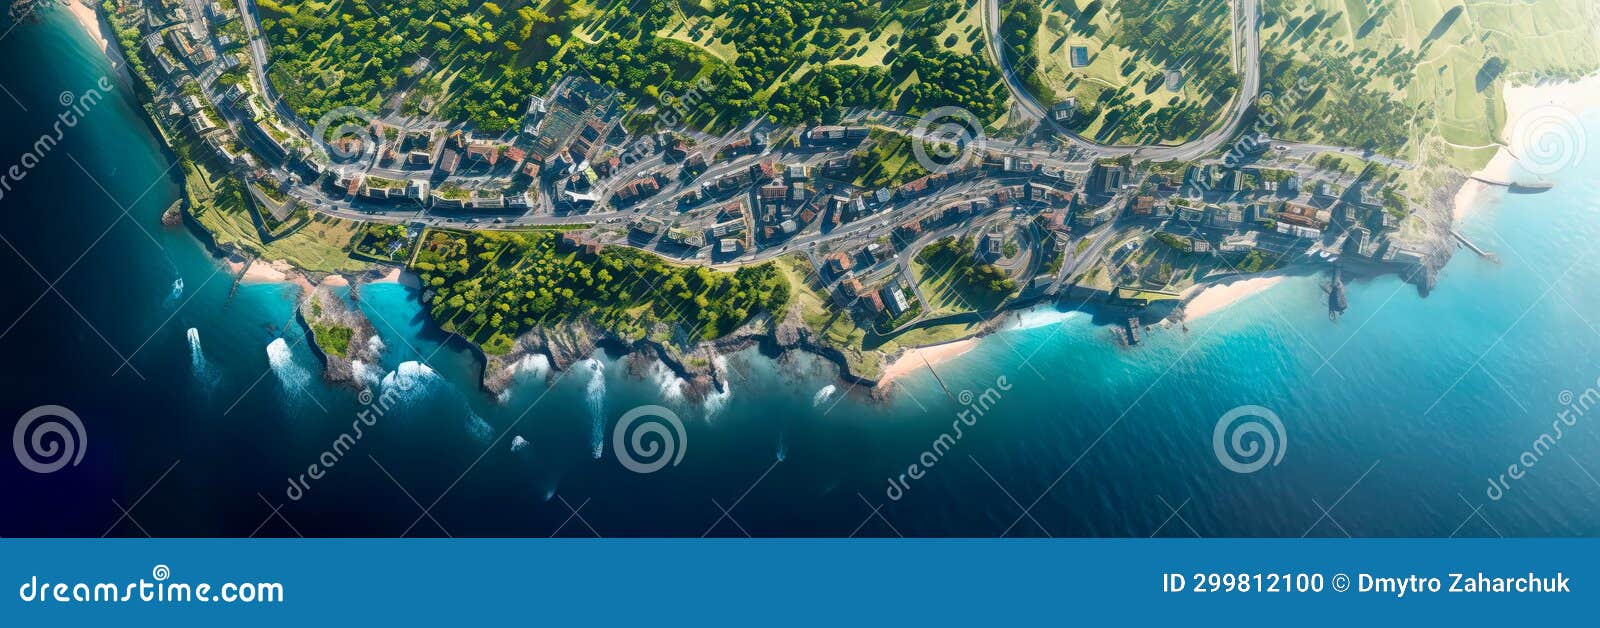 aerial view concept capturing the symmetrical patterns of coastal areas, with beaches, waves, and waterfronts